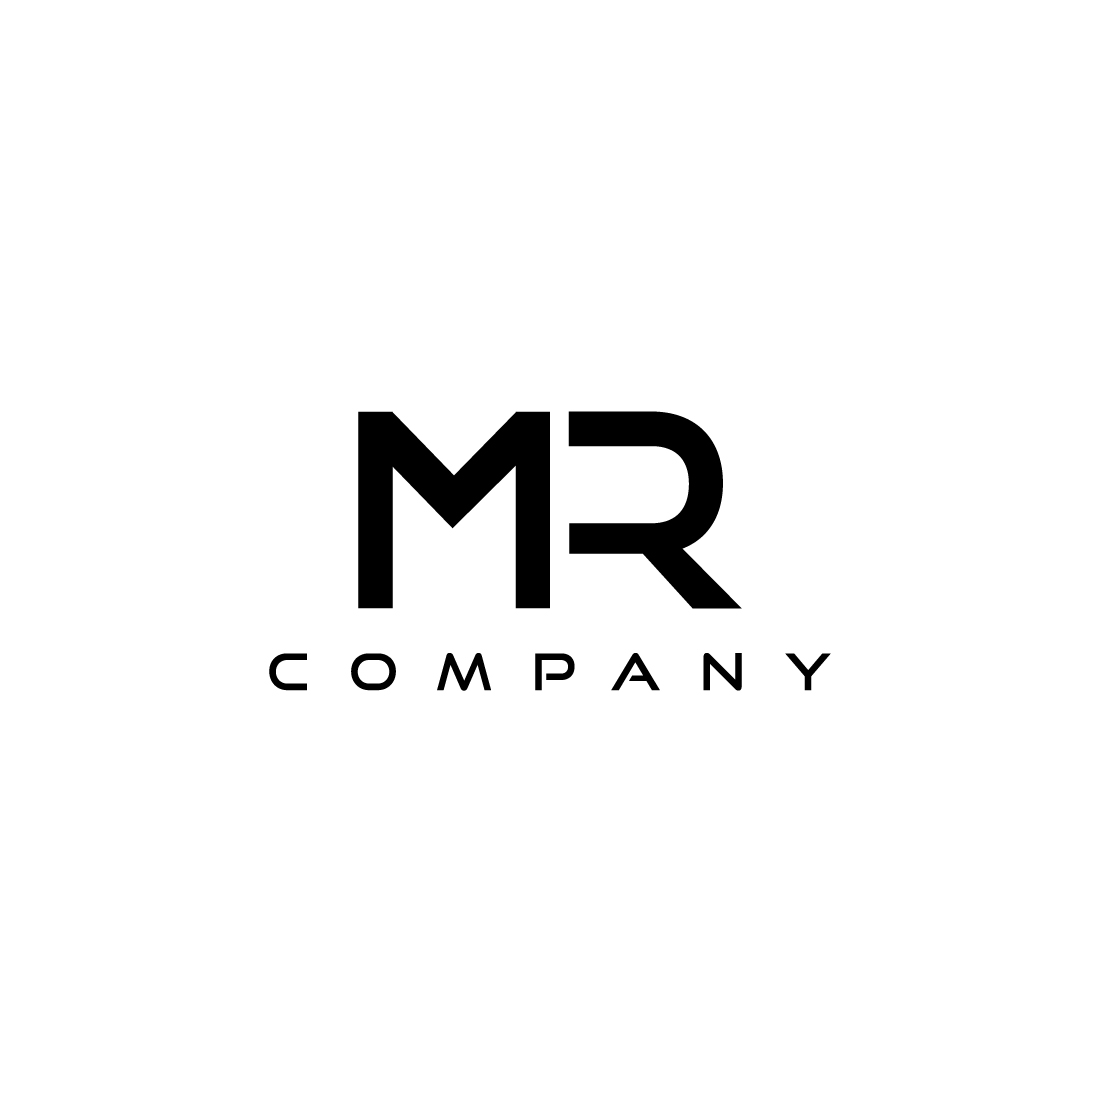 Abstract MR logo with a modern look preview image.